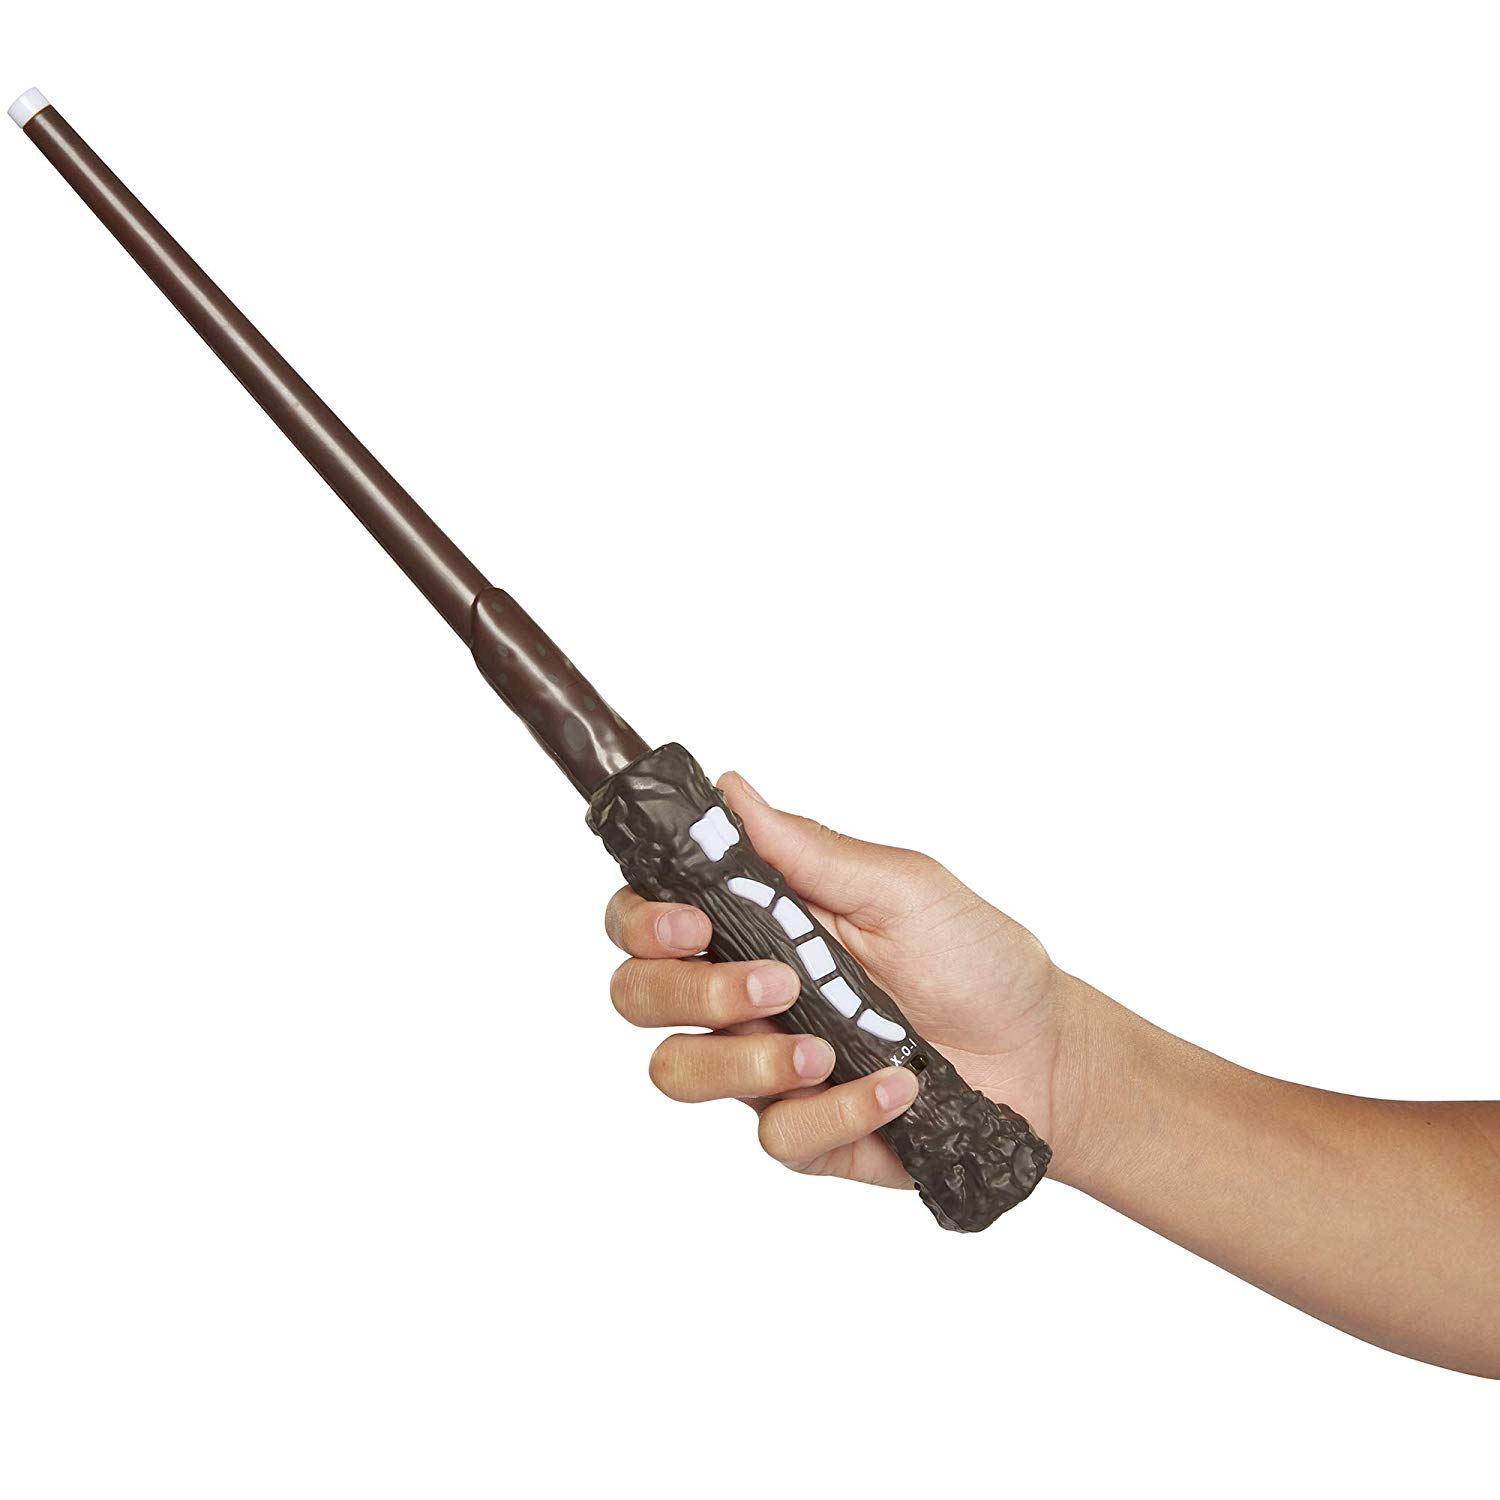 11 SPELLS To Cast Official Toy Wand with Lights & Sounds Albus Dumbledores Wizard Training Wand Harry Potter Wand & Lord Voldemort Wand Also Available 